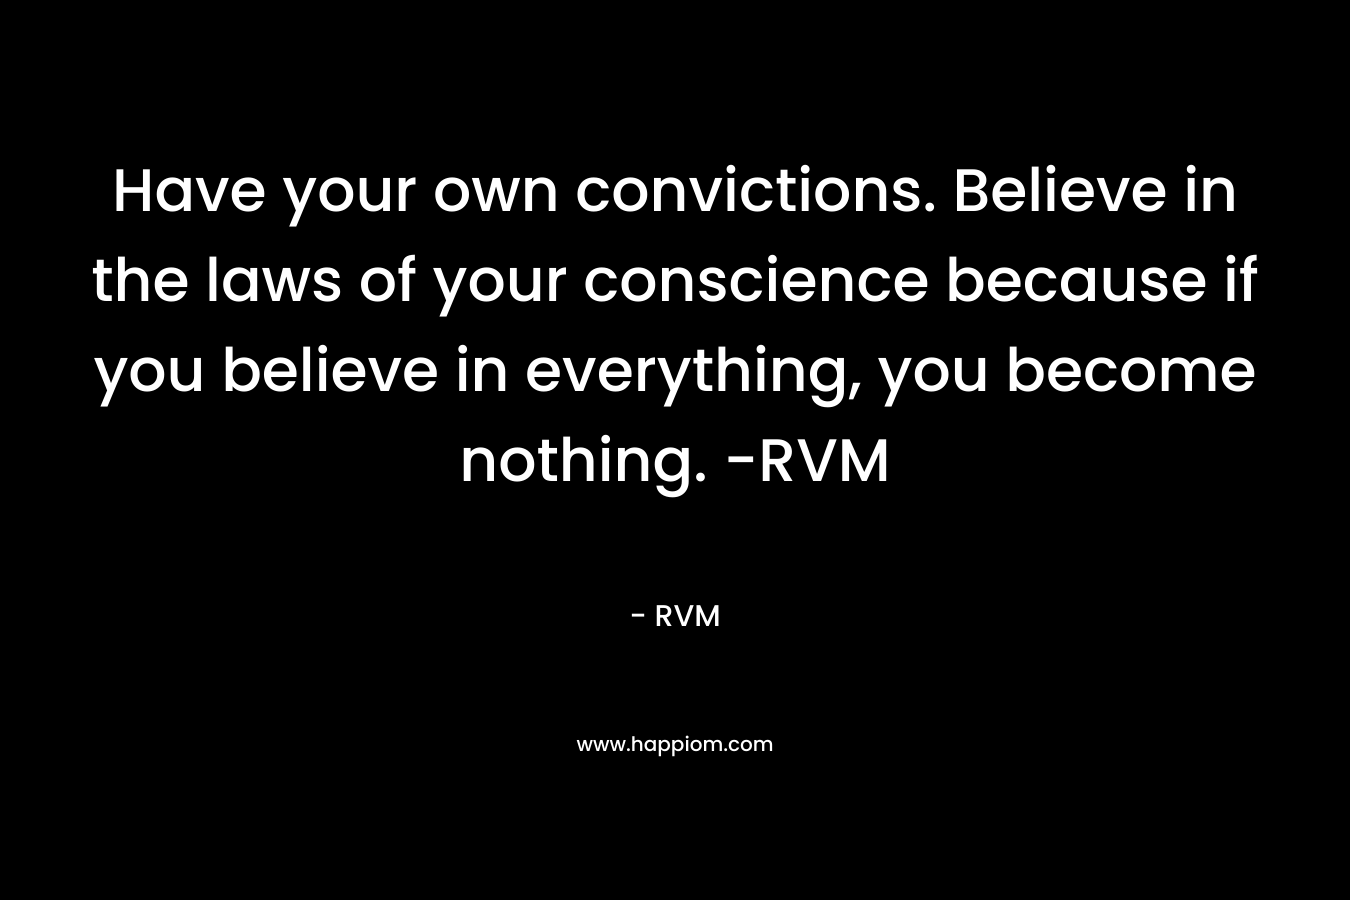 Have your own convictions. Believe in the laws of your conscience because if you believe in everything, you become nothing. -RVM